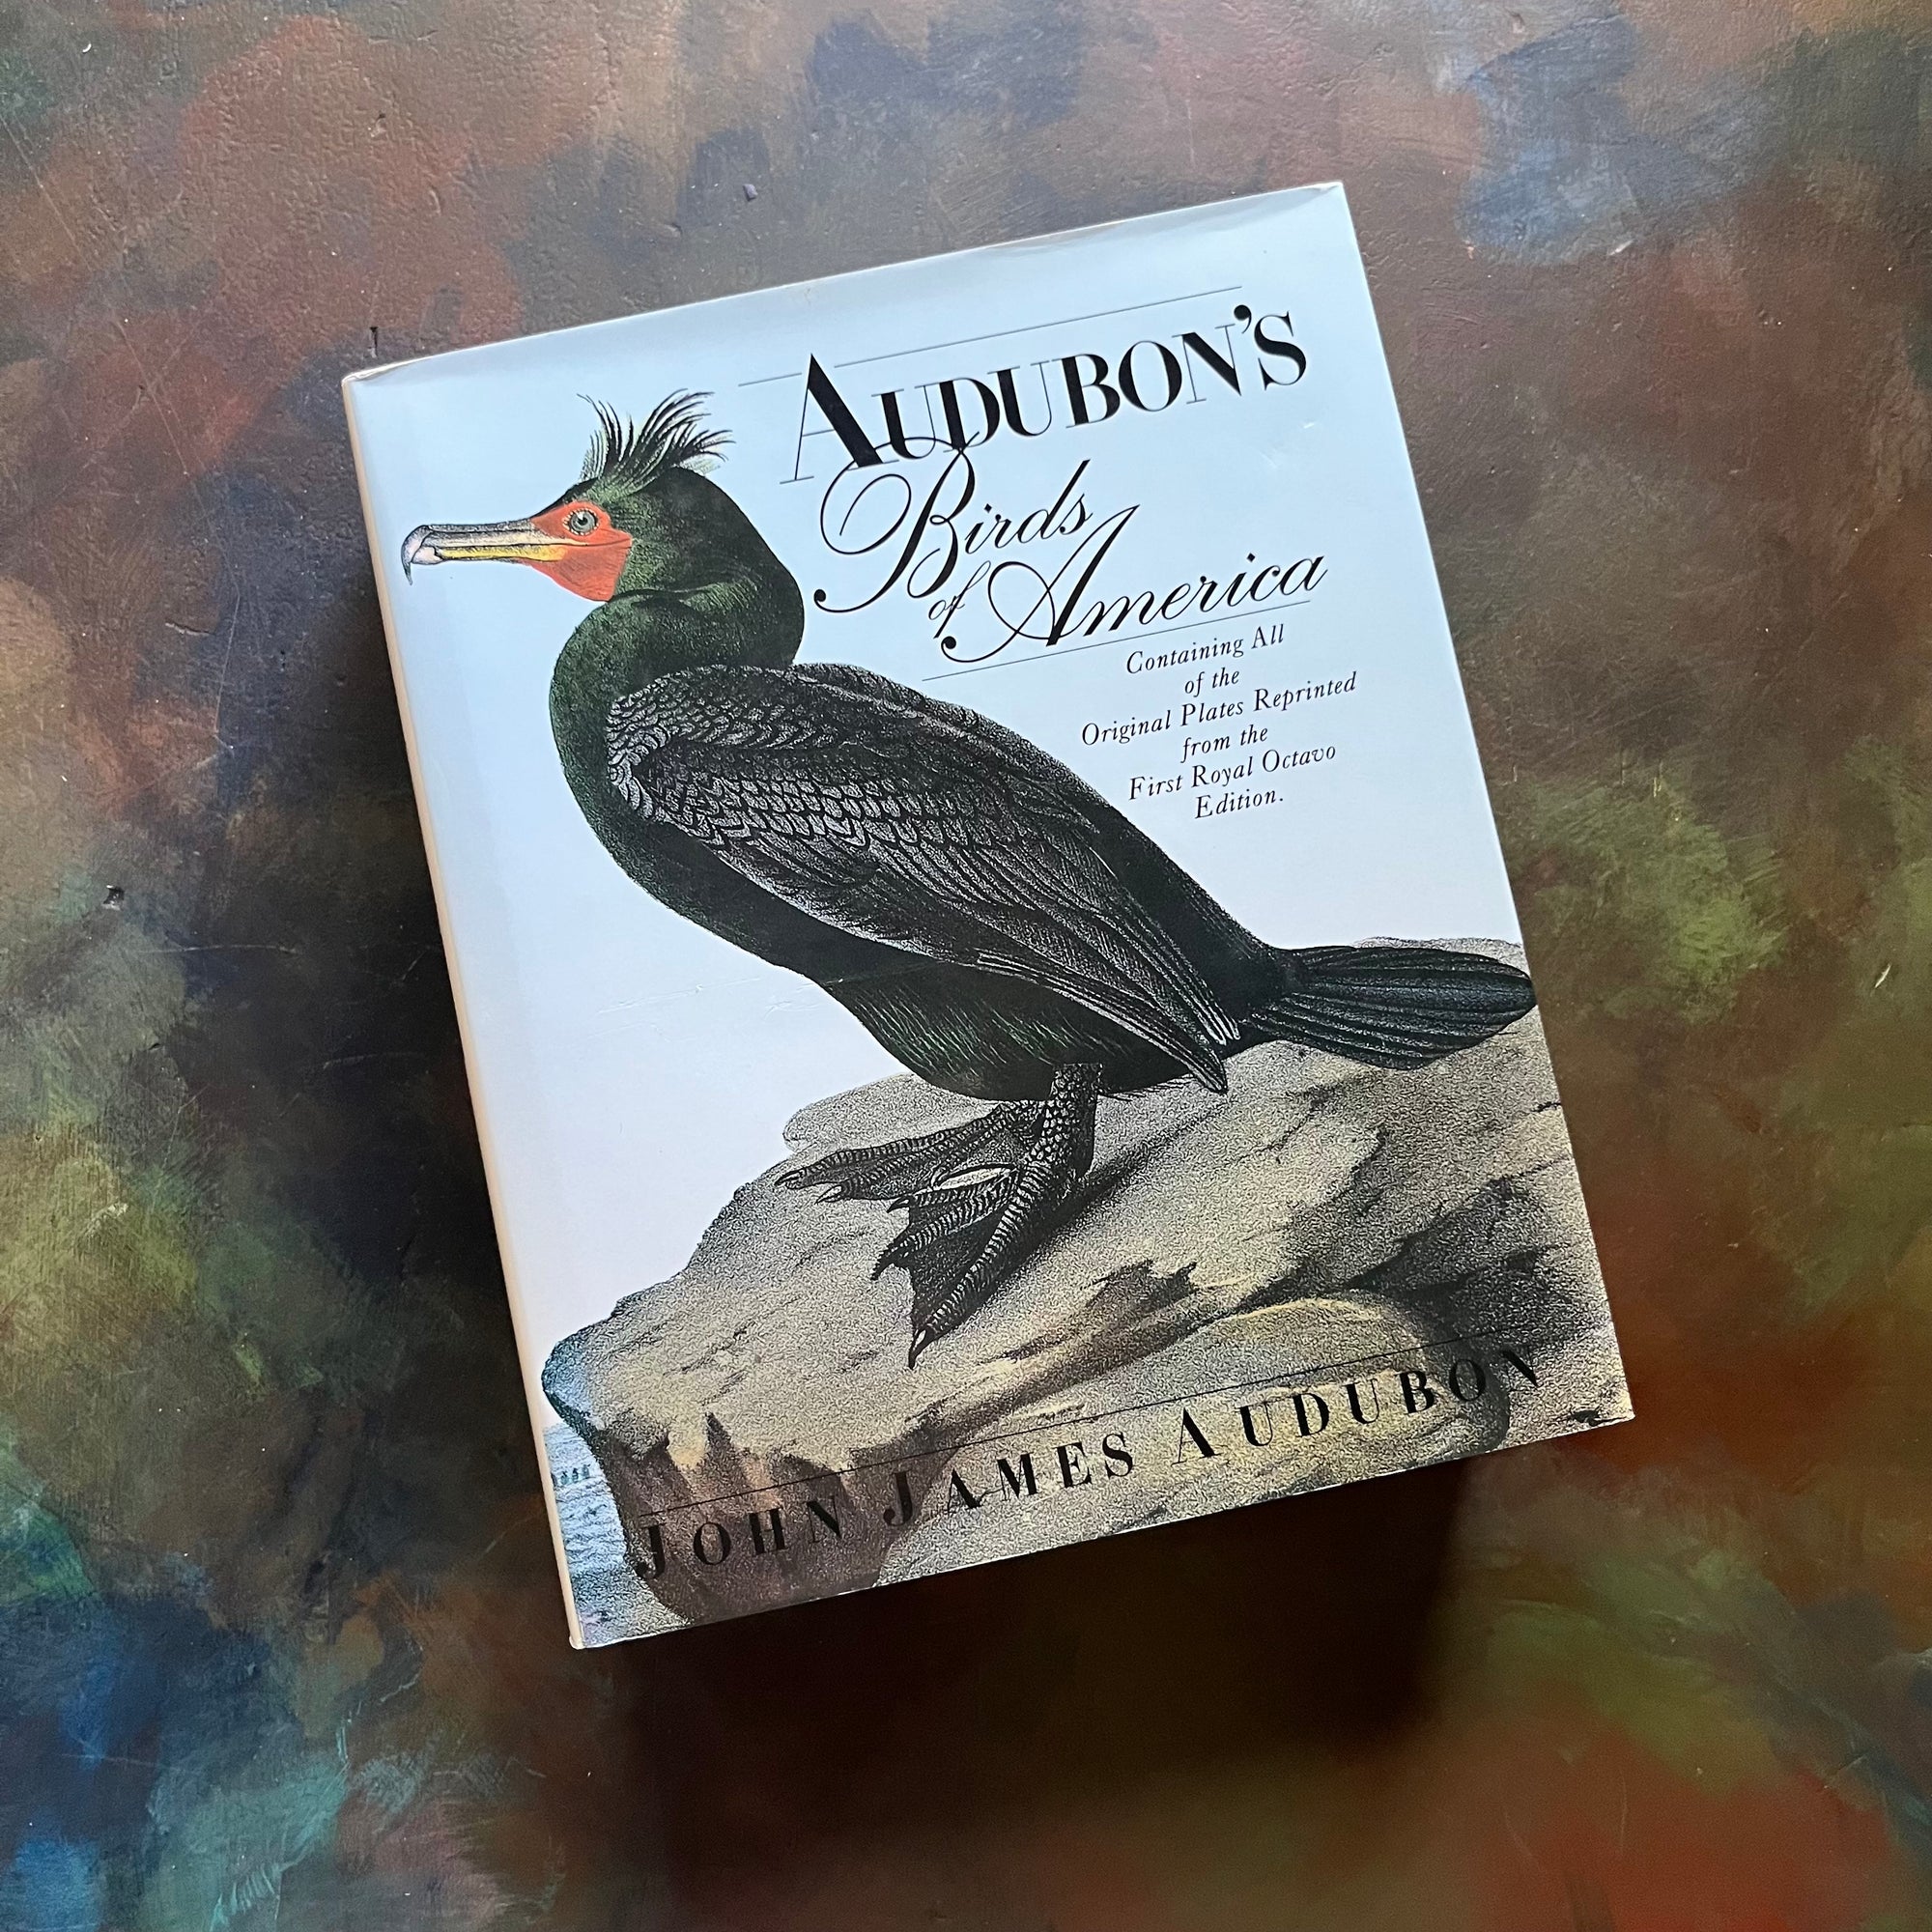 Audubon's Birds of America by John James Audubon-The Royal Octavo Edition-500 bird prints in one book-view of the dust jacket's front cover